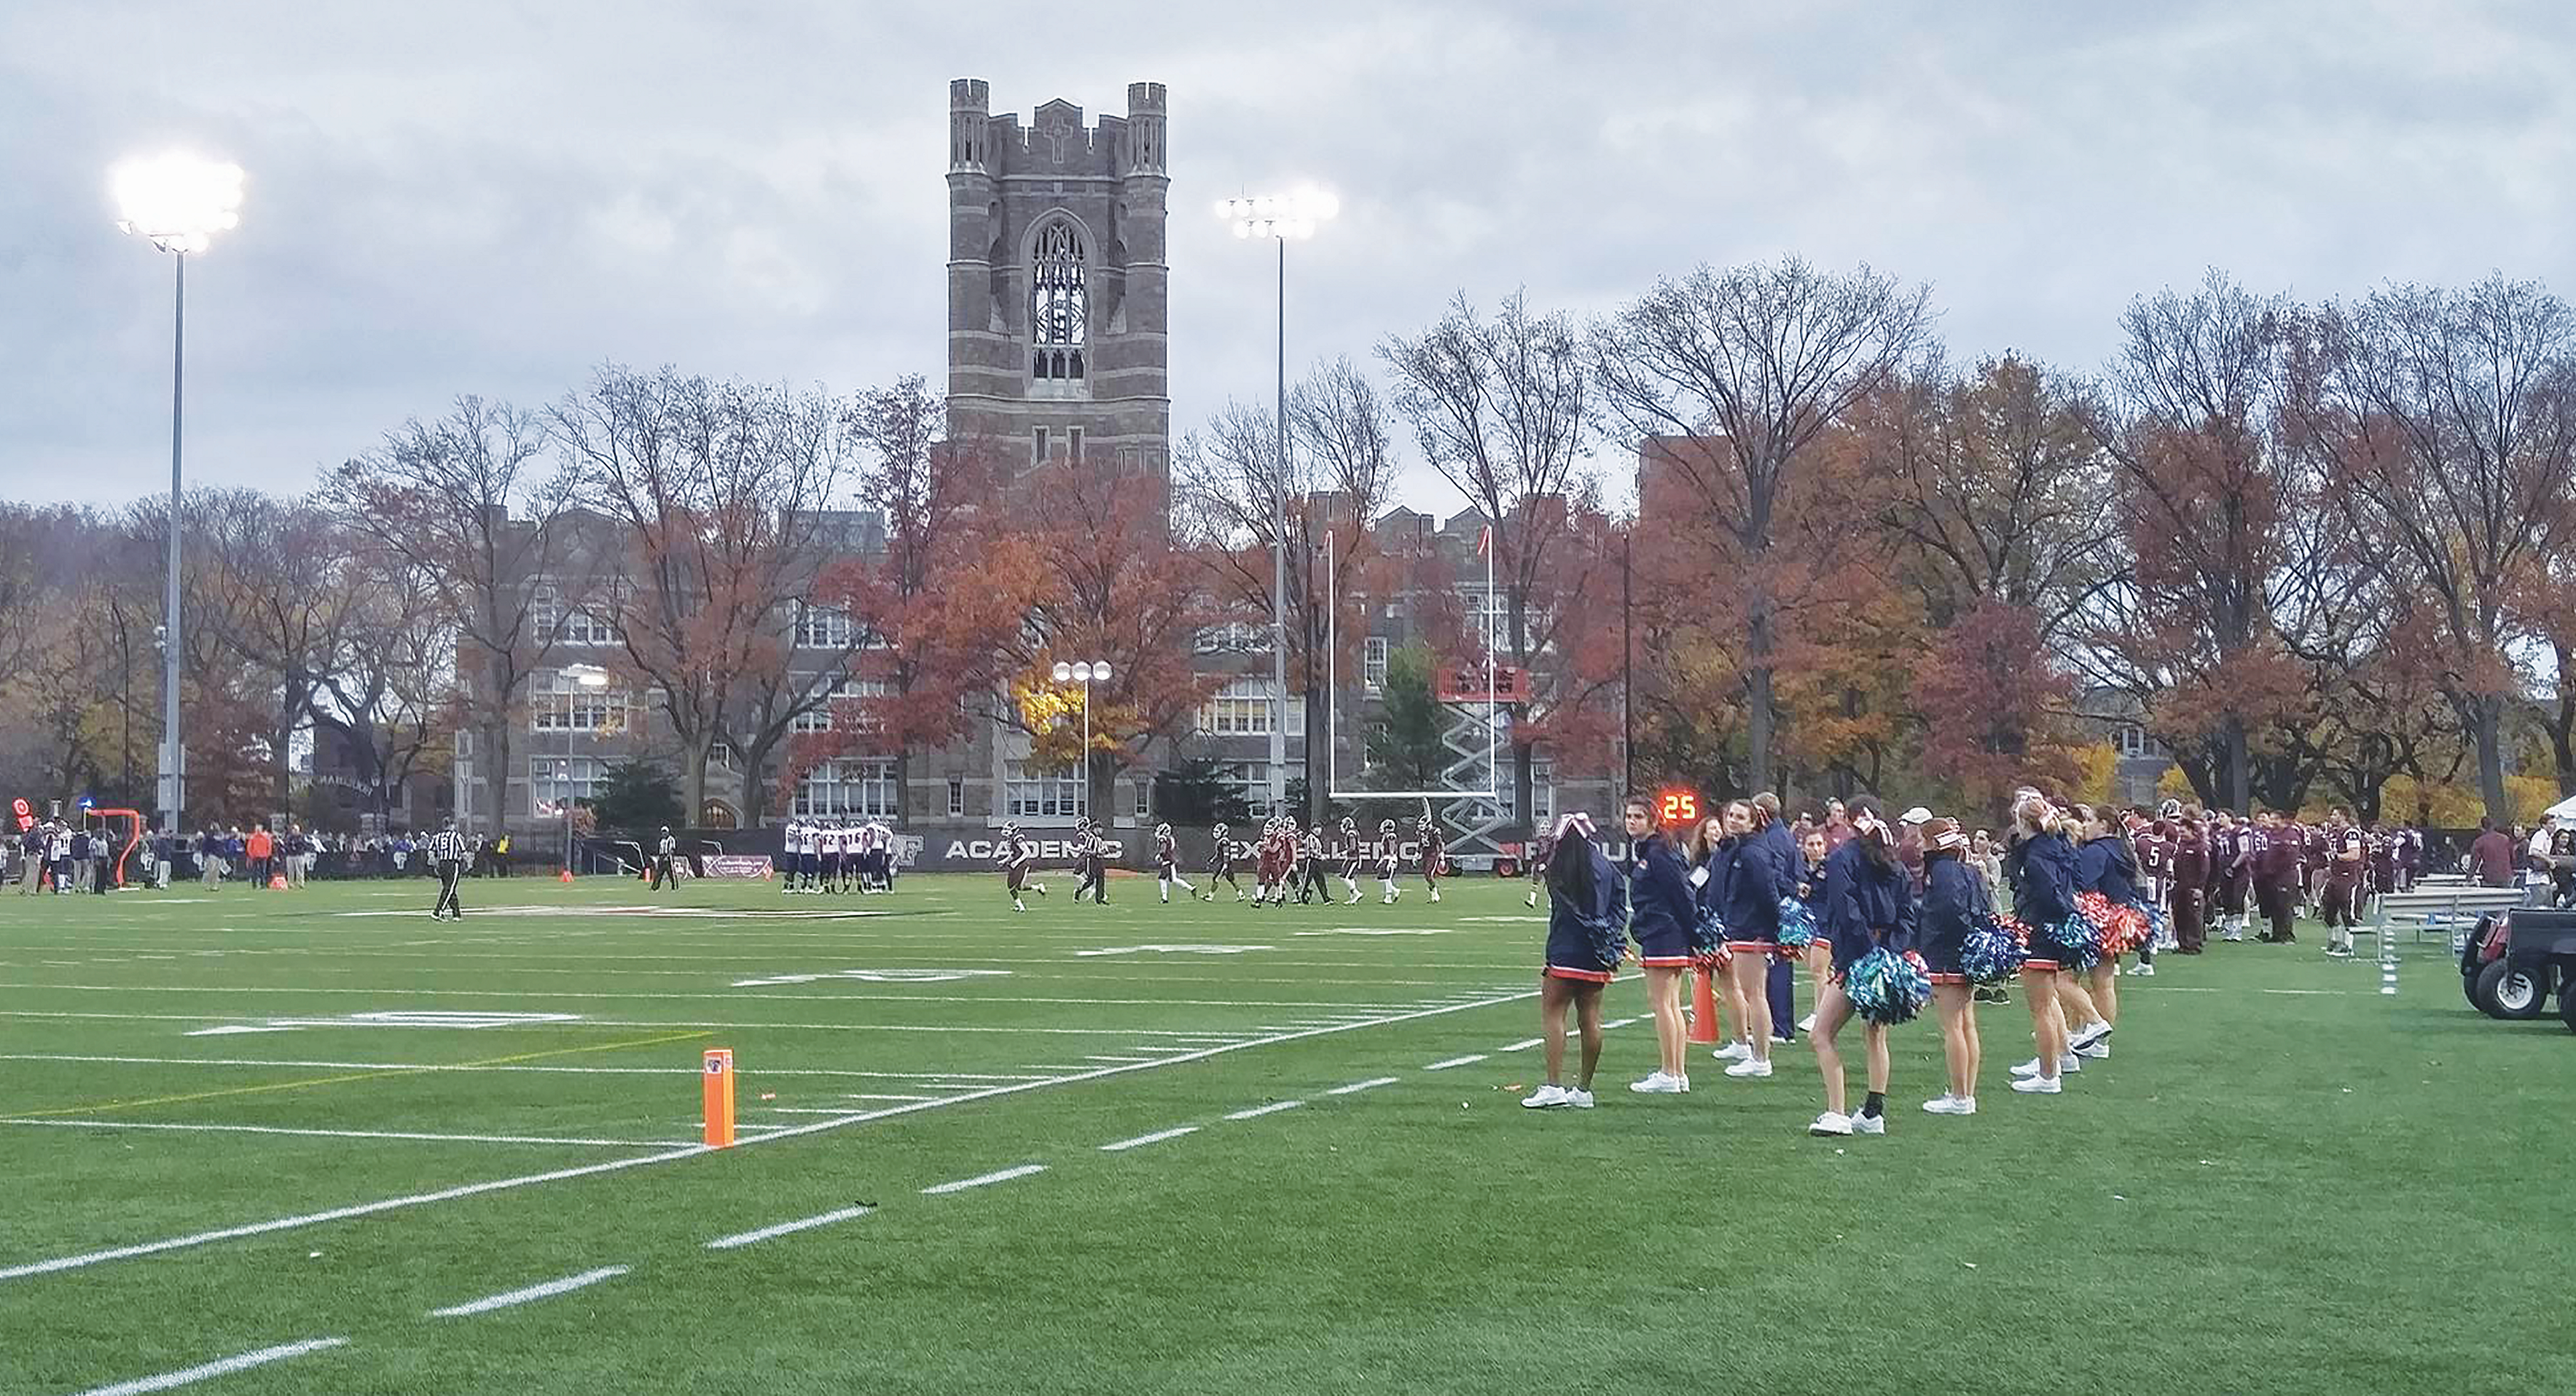 The Fordham University men’s football team lost at home to Holy Cross on this year’s Homecoming with a final score of 42-20. (PAOLA JOAQUIN ROSSO/THE OBSERVER)